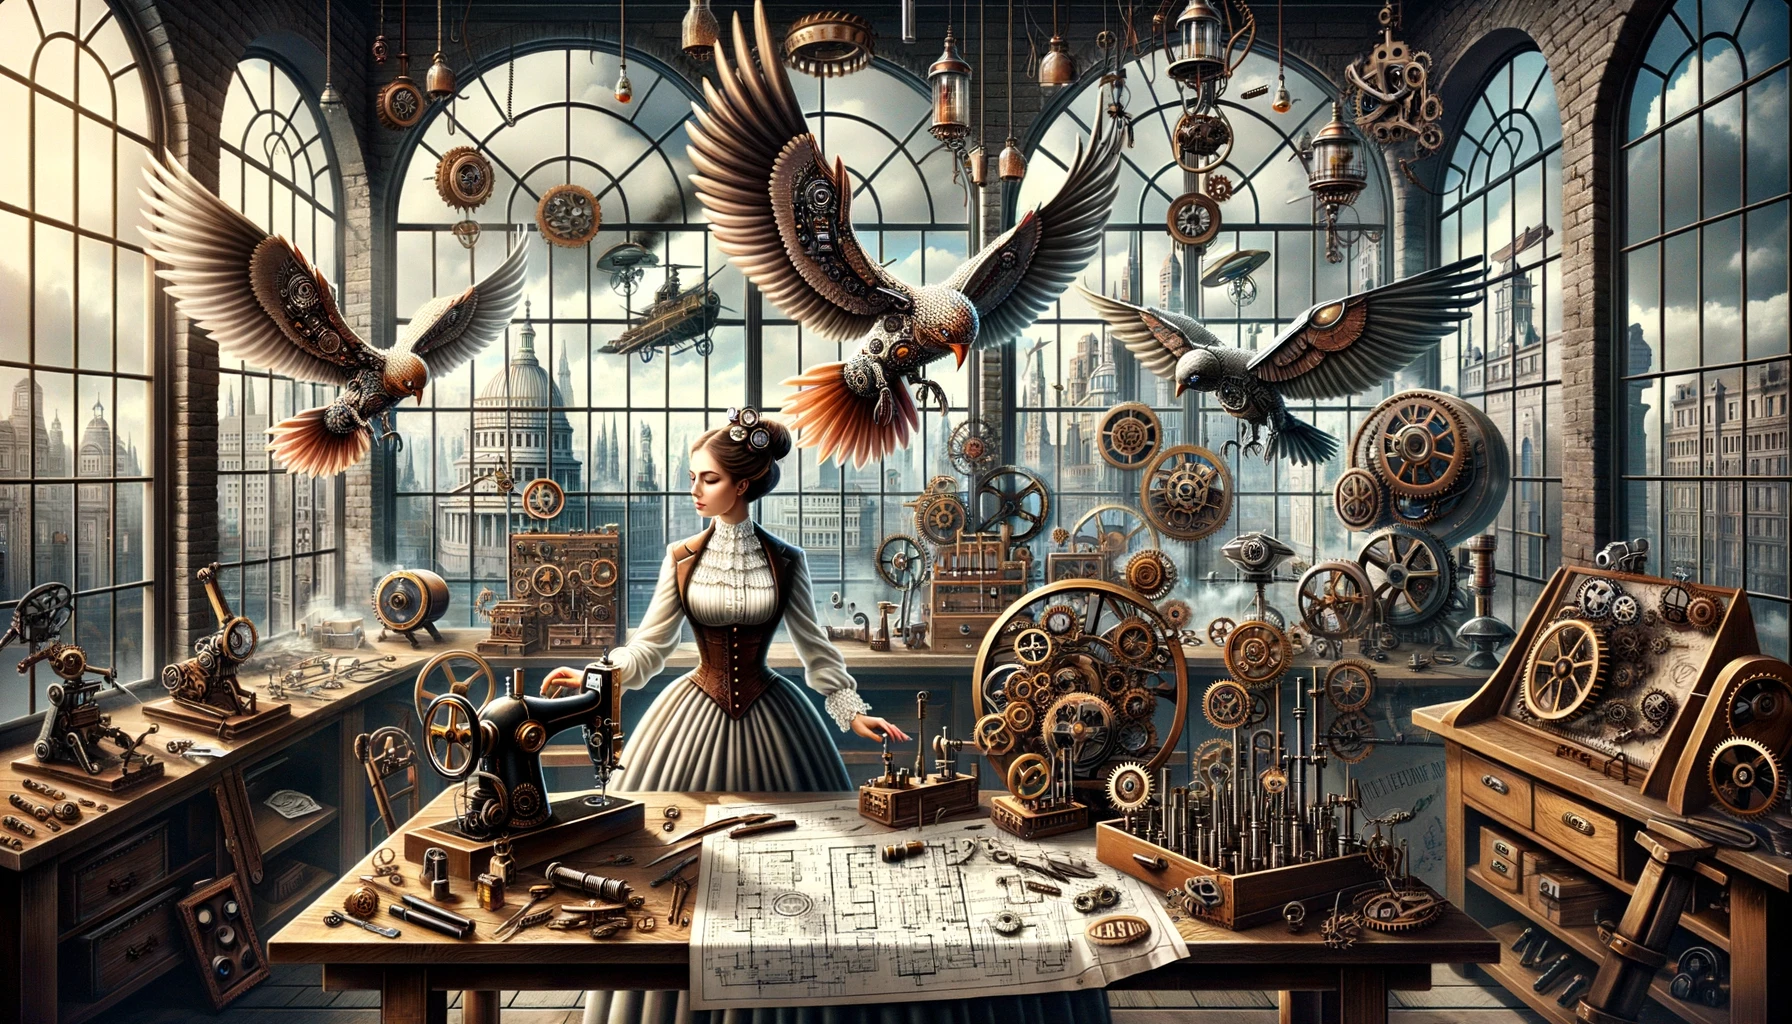 Illustration of a steampunk-inspired workshop. The heart of this space is the inventor, a woman with a flair for the dramatic, her attire a blend of Victorian and industrial elements. Mechanical birds, their designs both beautiful and functional, hover around her, perhaps her latest creations. The table she works on is a maze of blueprints, gears, and parts, suggesting countless projects in progress. Behind her, a window frames a city in its industrial prime, with tall buildings and flying machines defining the landscape.